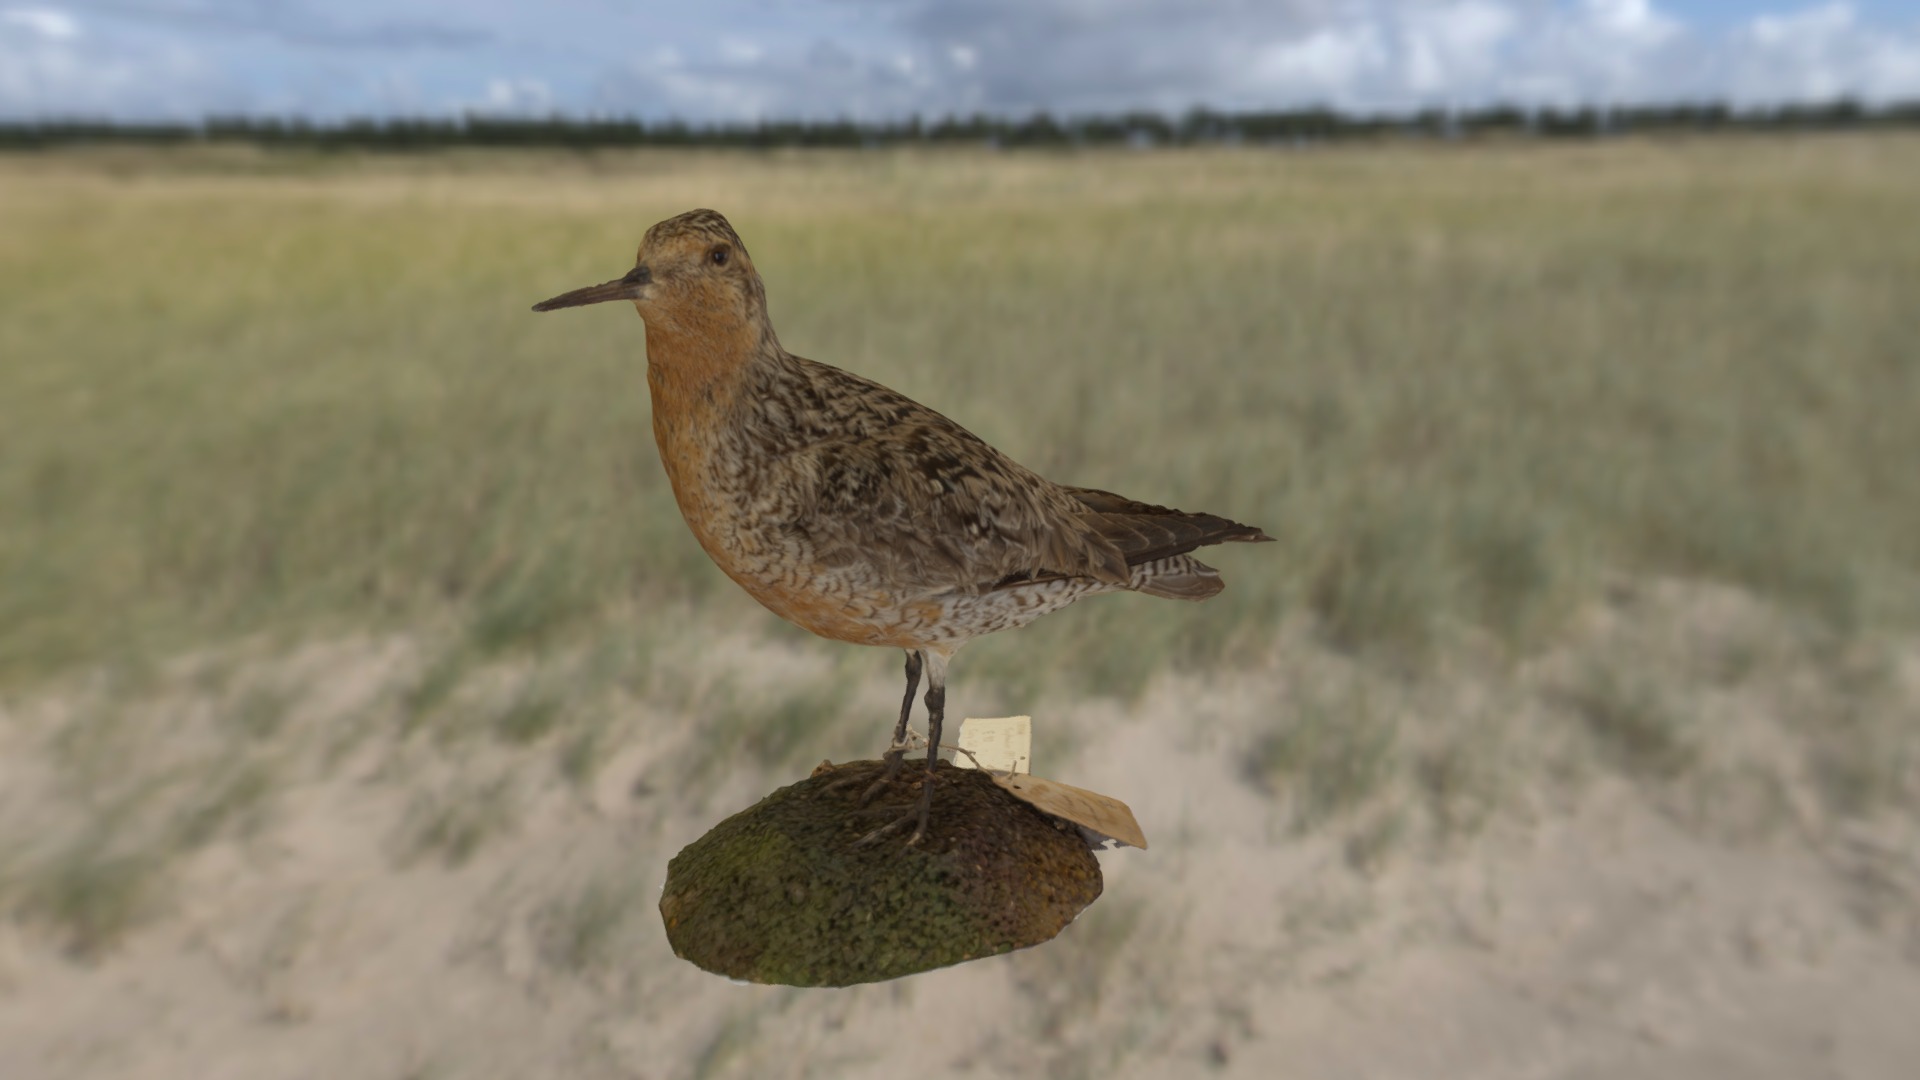 Female Red Knot from the Maria Mitchell Assoc.